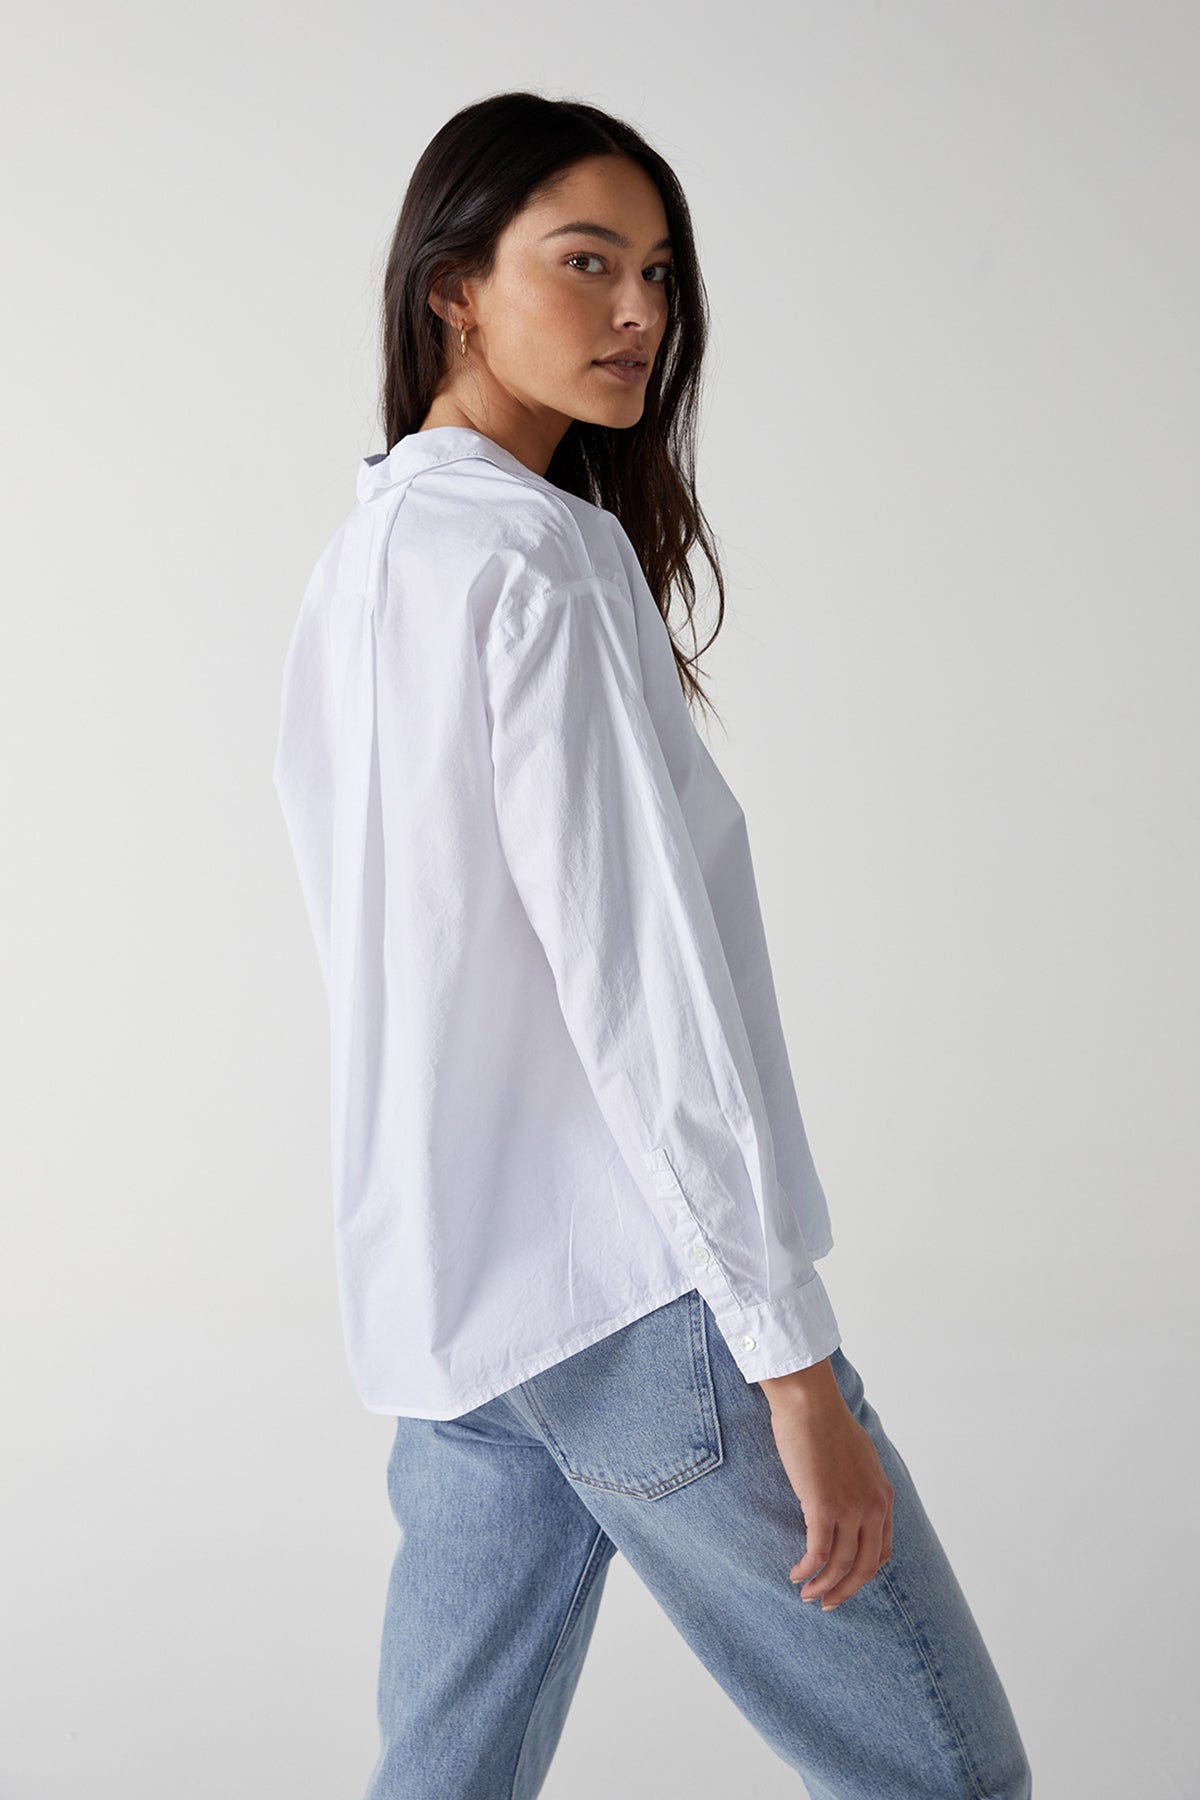 Velvet by Jenny Graham Brea Cotton Shirt in White with Blue Denim and Gold Hoop Earrings, Model Standing to Show Side, Sleeve and Back.-25154669969601